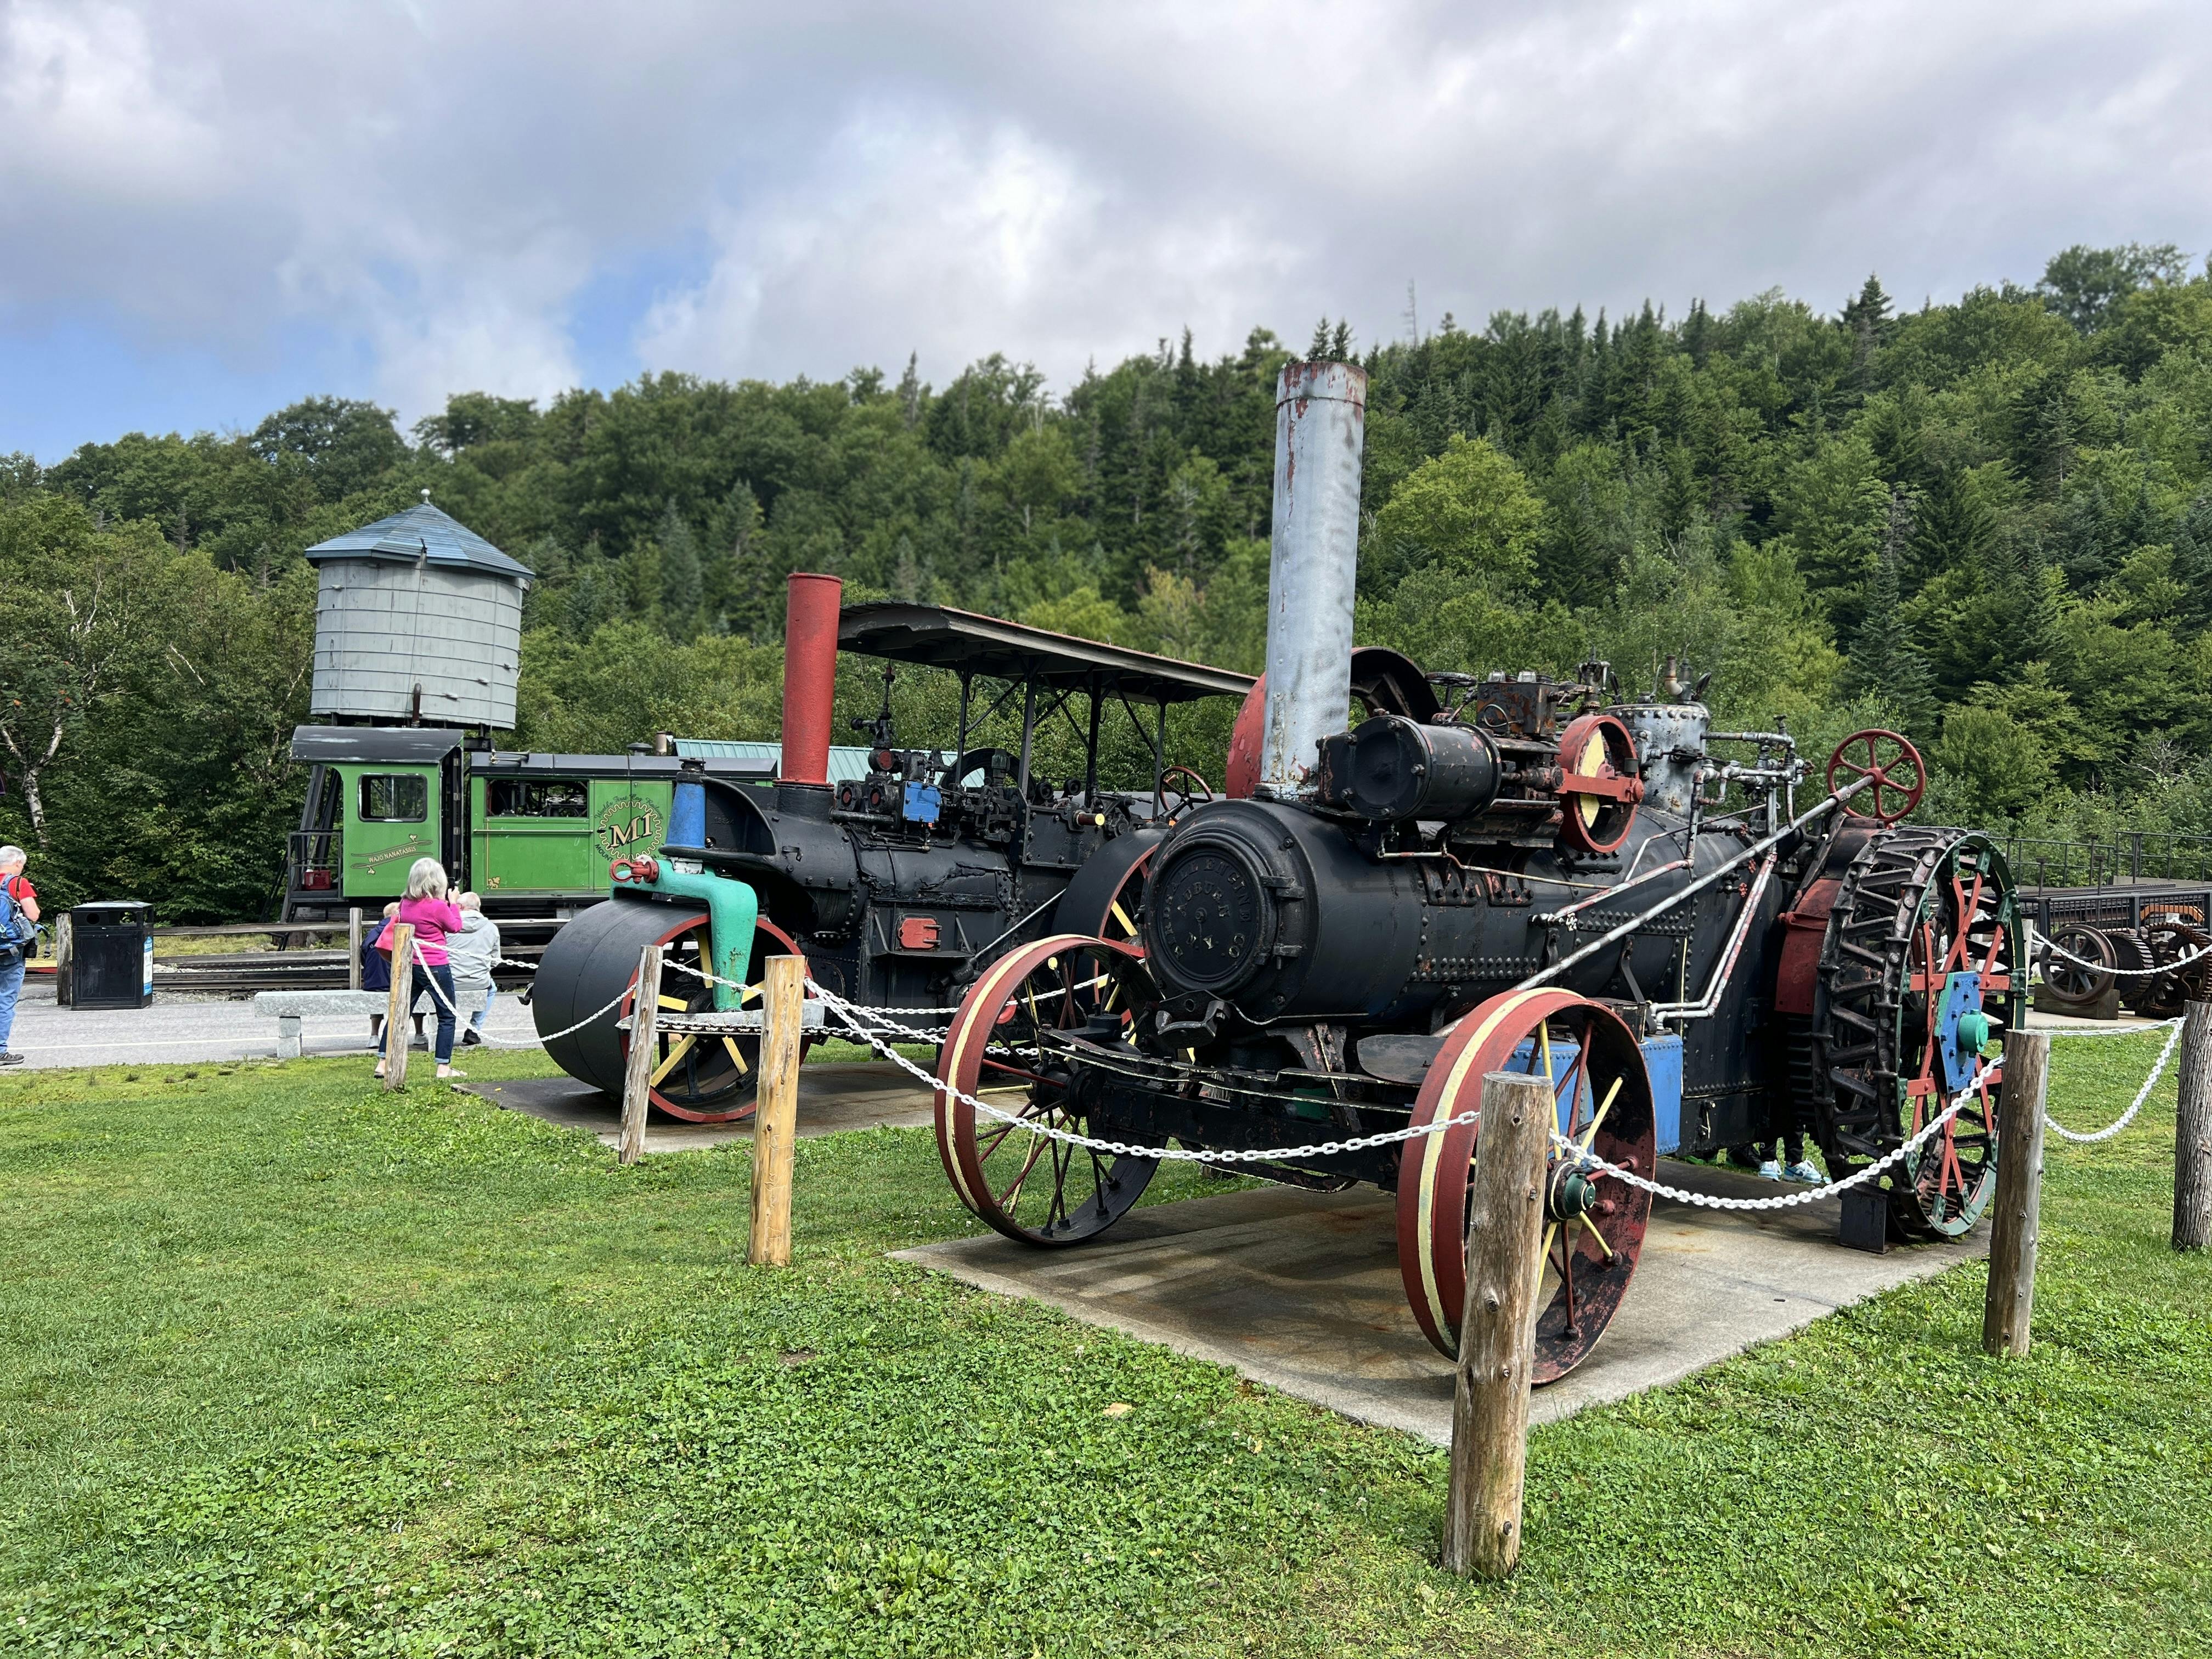 Antique steam engines at the historic Cog Railway.